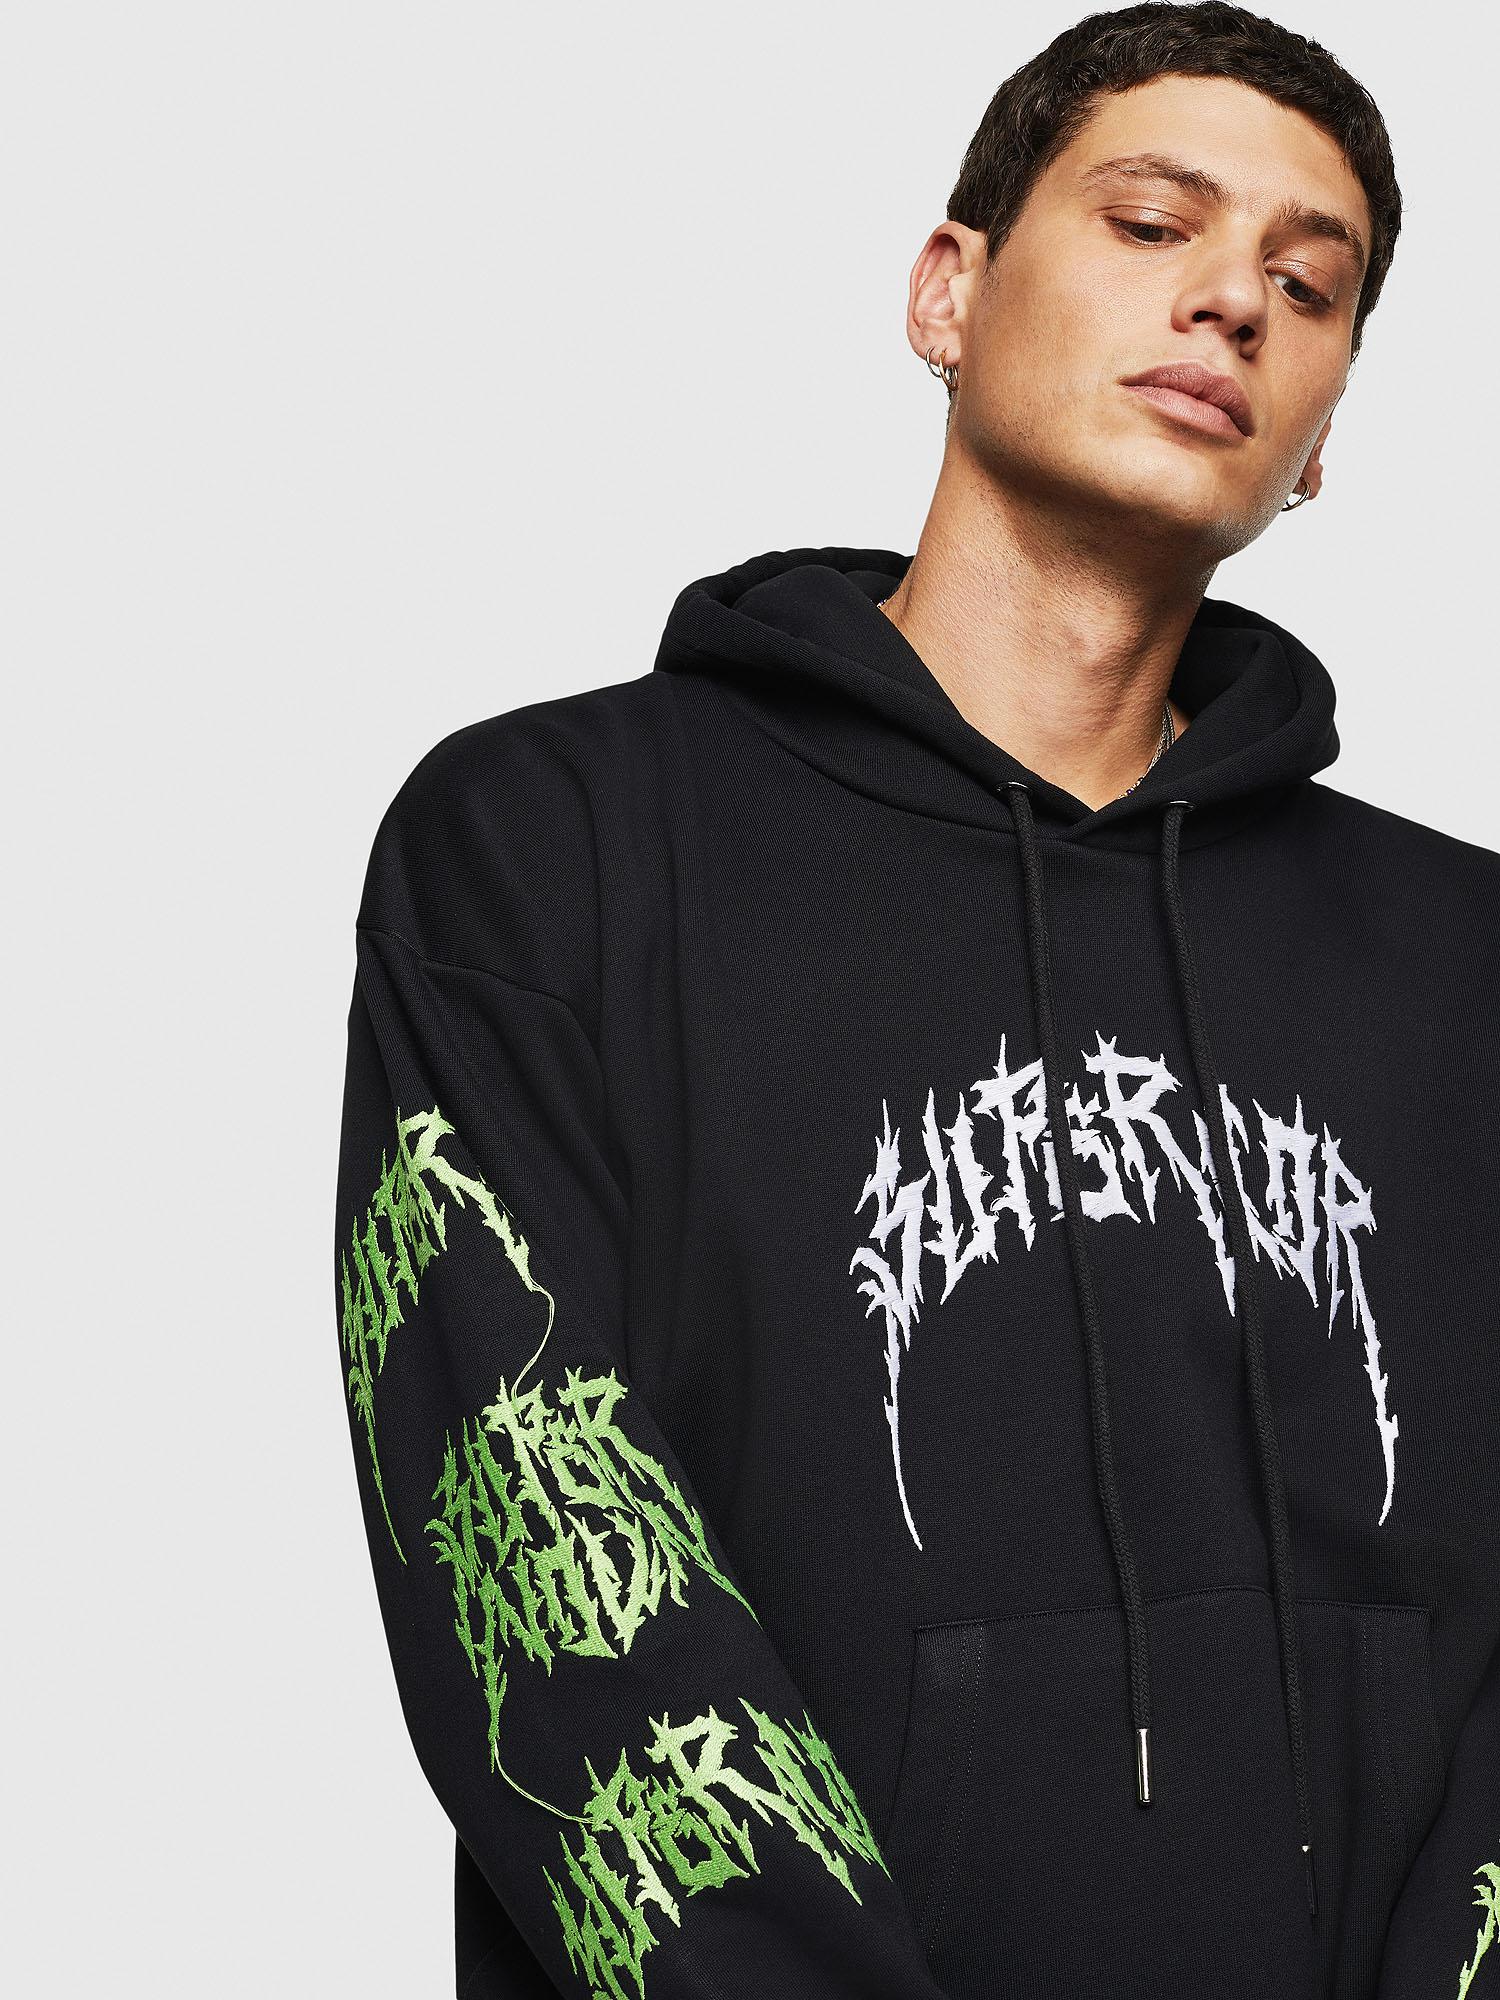 DIESEL Cotton S-alby-bx3 Embroidered Hoodie With "fierce" Print in